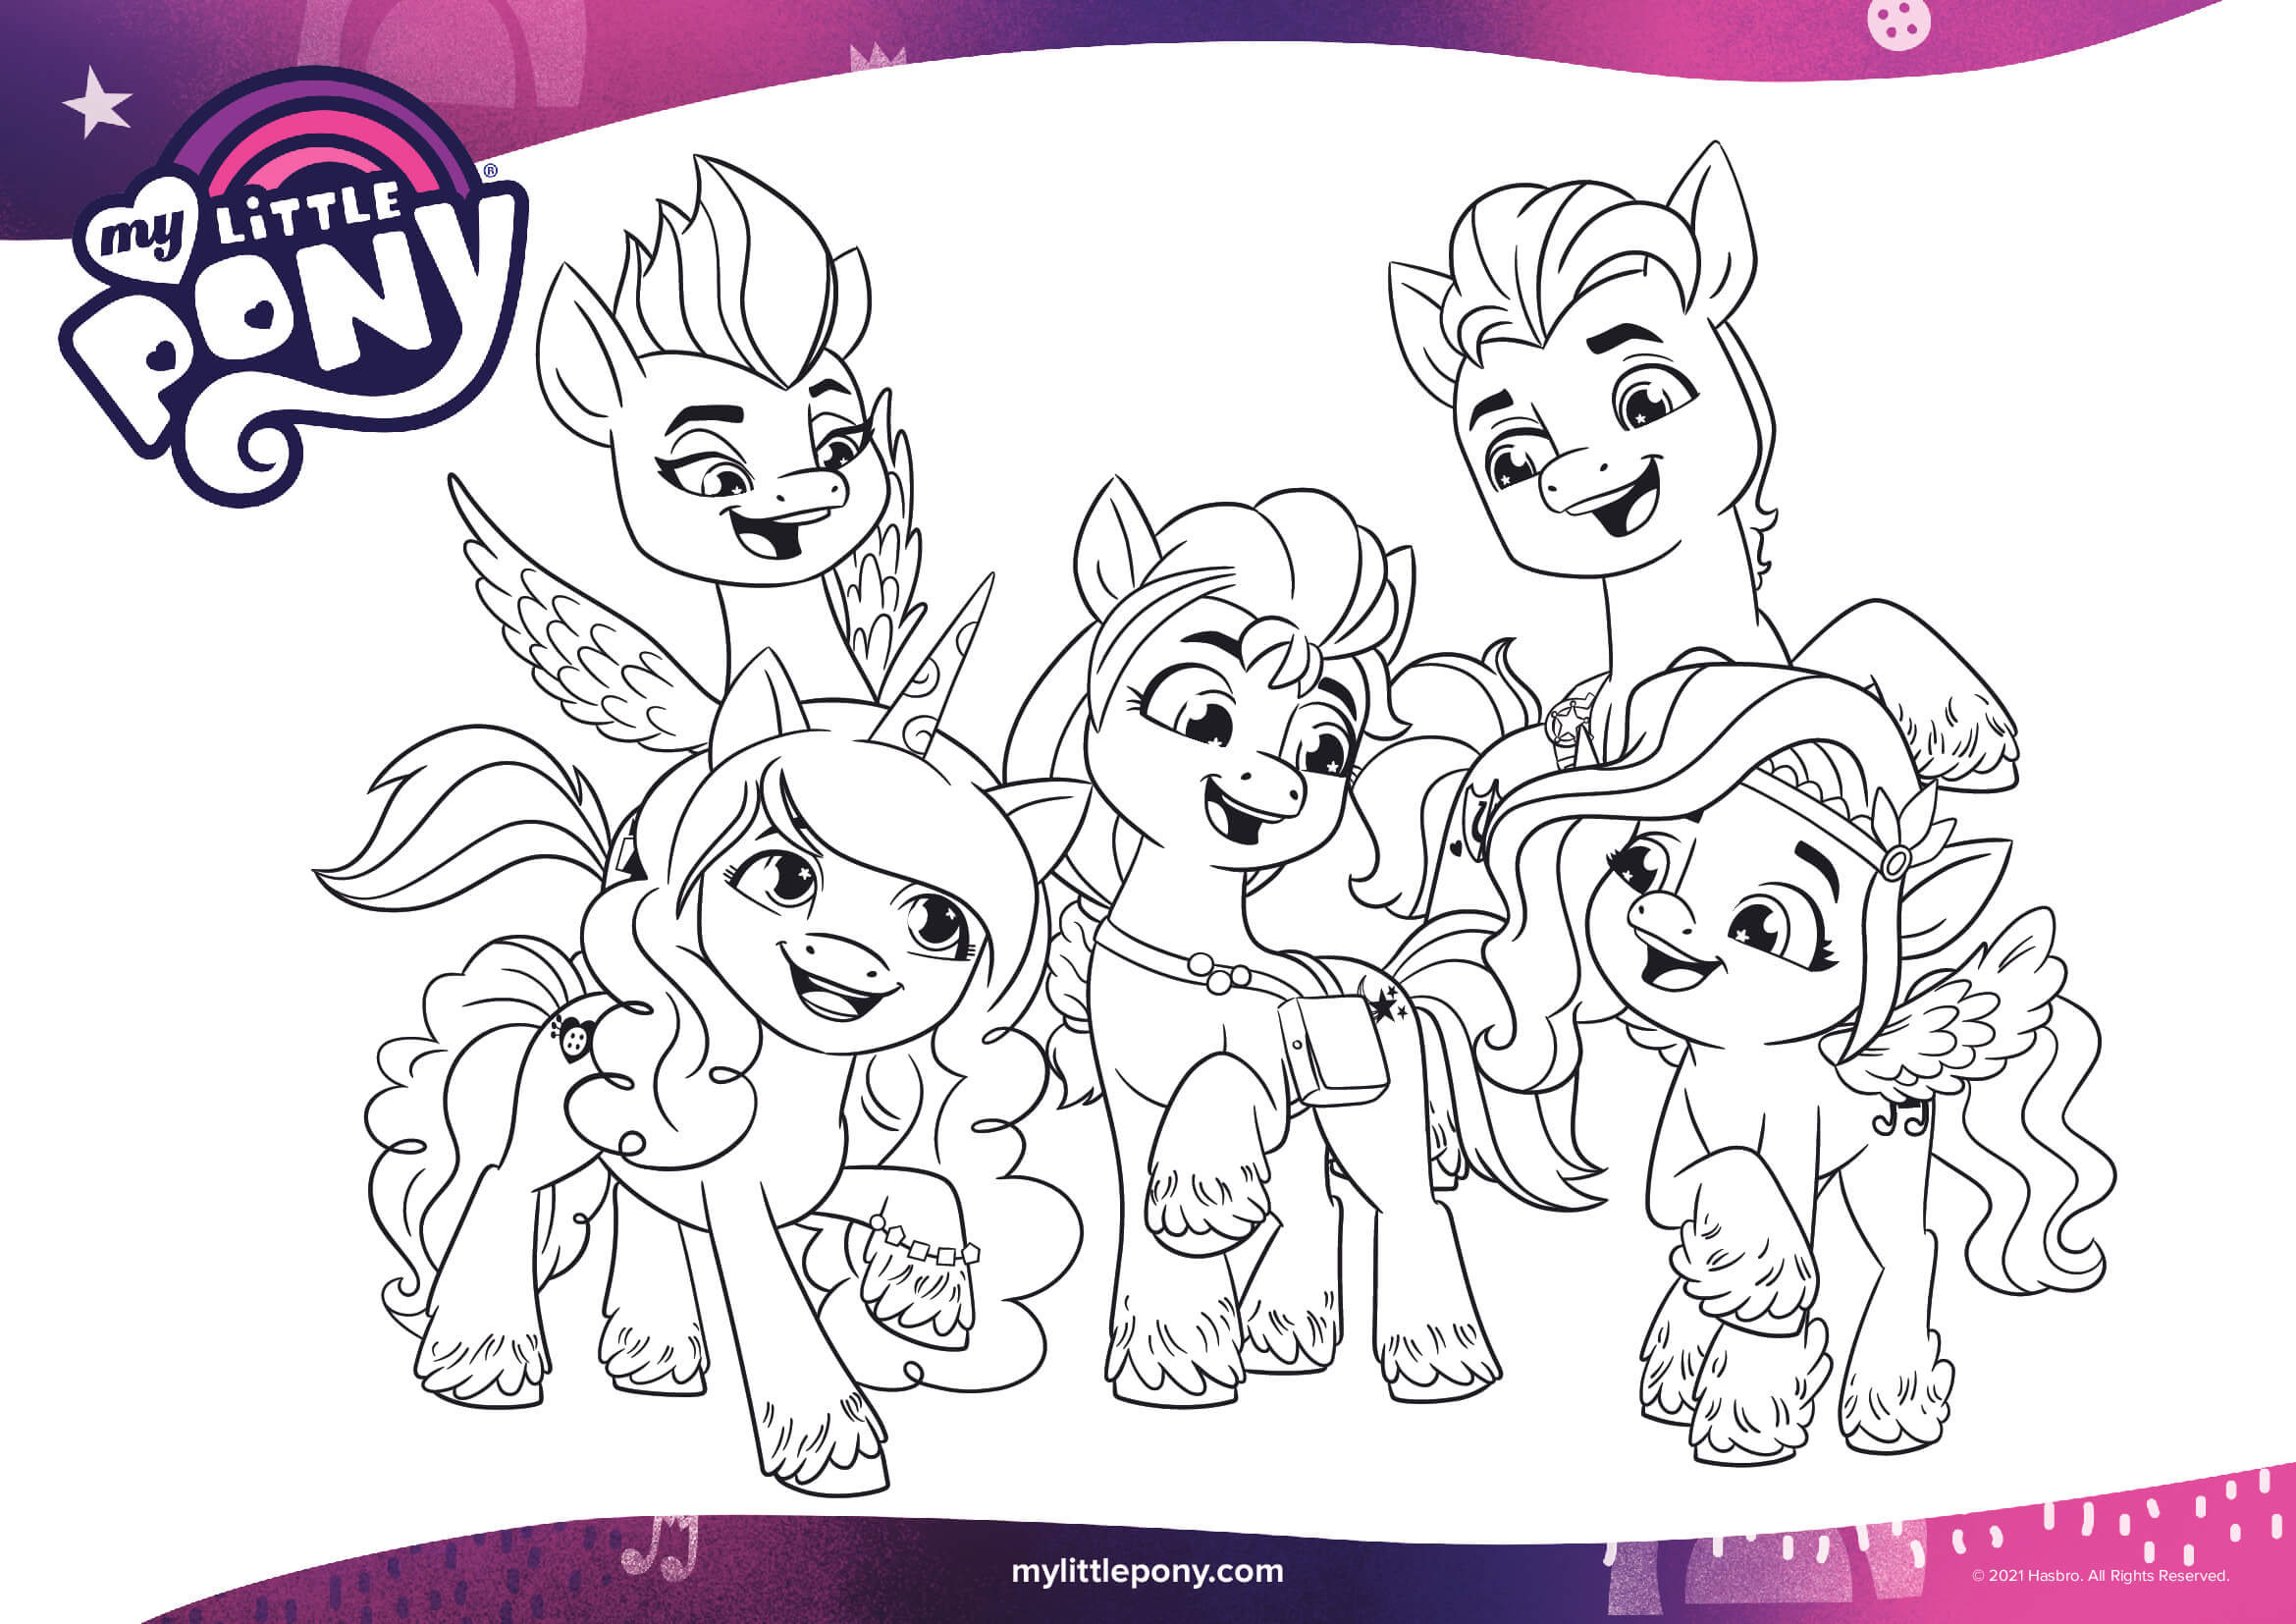 My Little Pony A New Generation Mlp 5